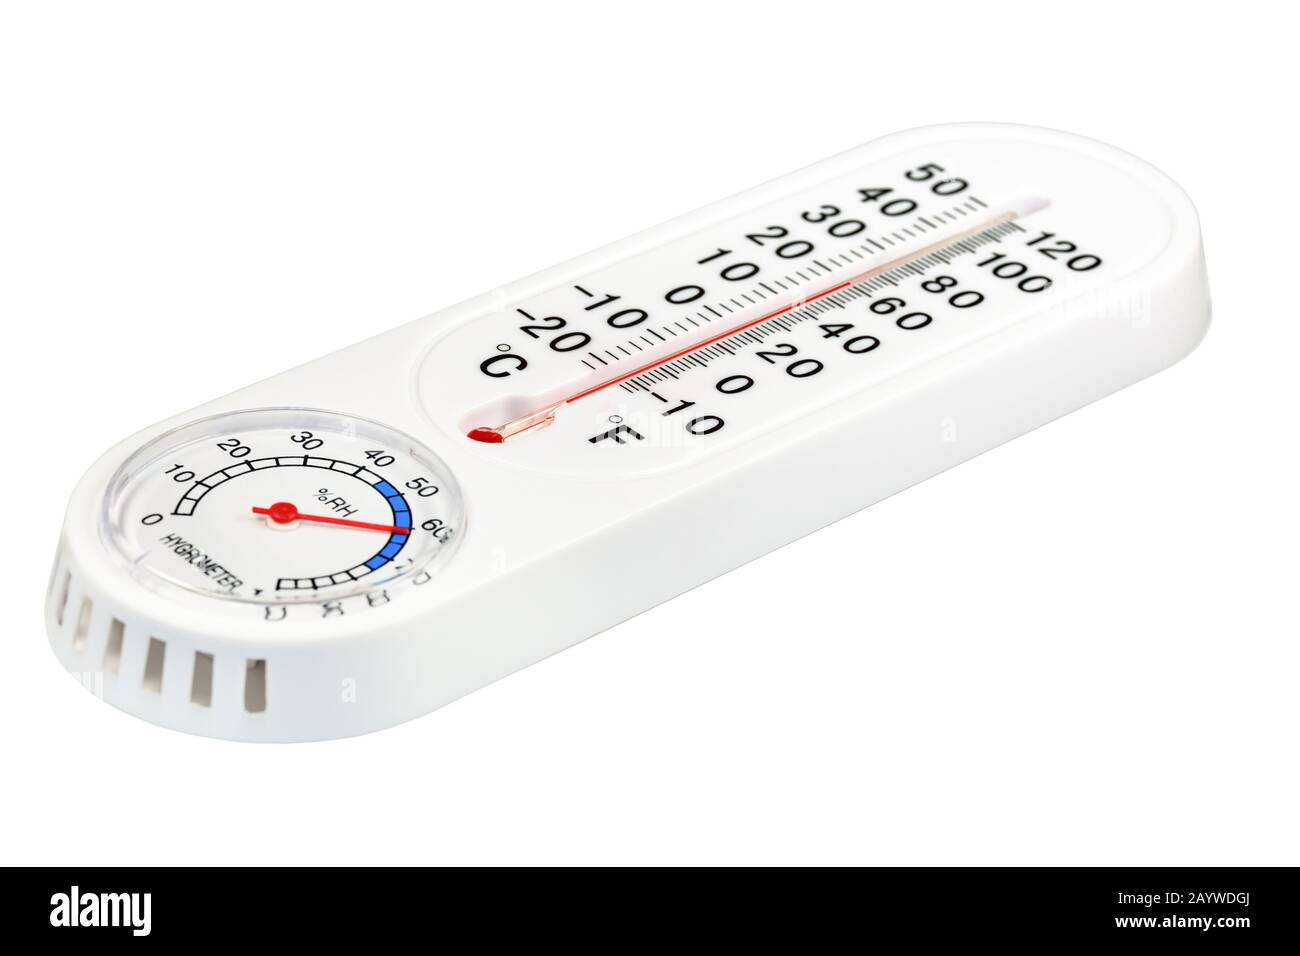 https://c8.alamy.com/comp/2AYWDGJ/household-combined-instrument-for-measuring-temperature-and-humidity-on-a-white-background-isolated-2AYWDGJ.jpg